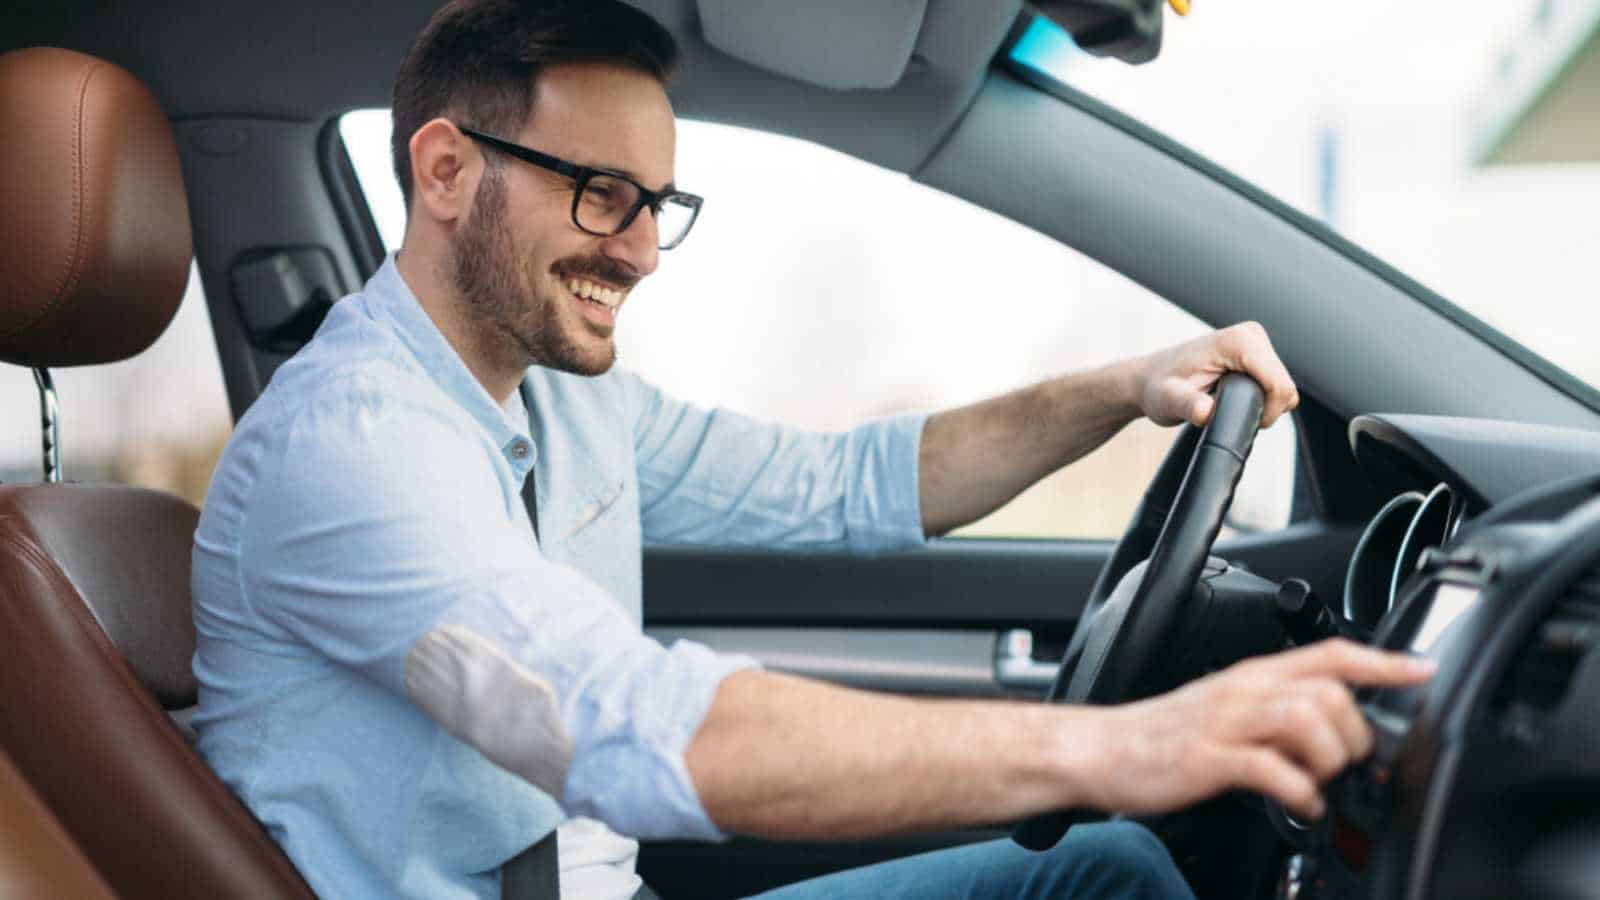 <p>Like your house, your car is another excellent place to hide money. Just don’t make the mistake of putting in your center console.</p><p>Instead, use these unique places to hide money from whomever you want</p><p><a href="https://www.moneysmartguides.com/best-places-to-hide-money-in-your-car">THE BEST PLACES TO HIDE MONEY IN YOUR CAR</a></p>